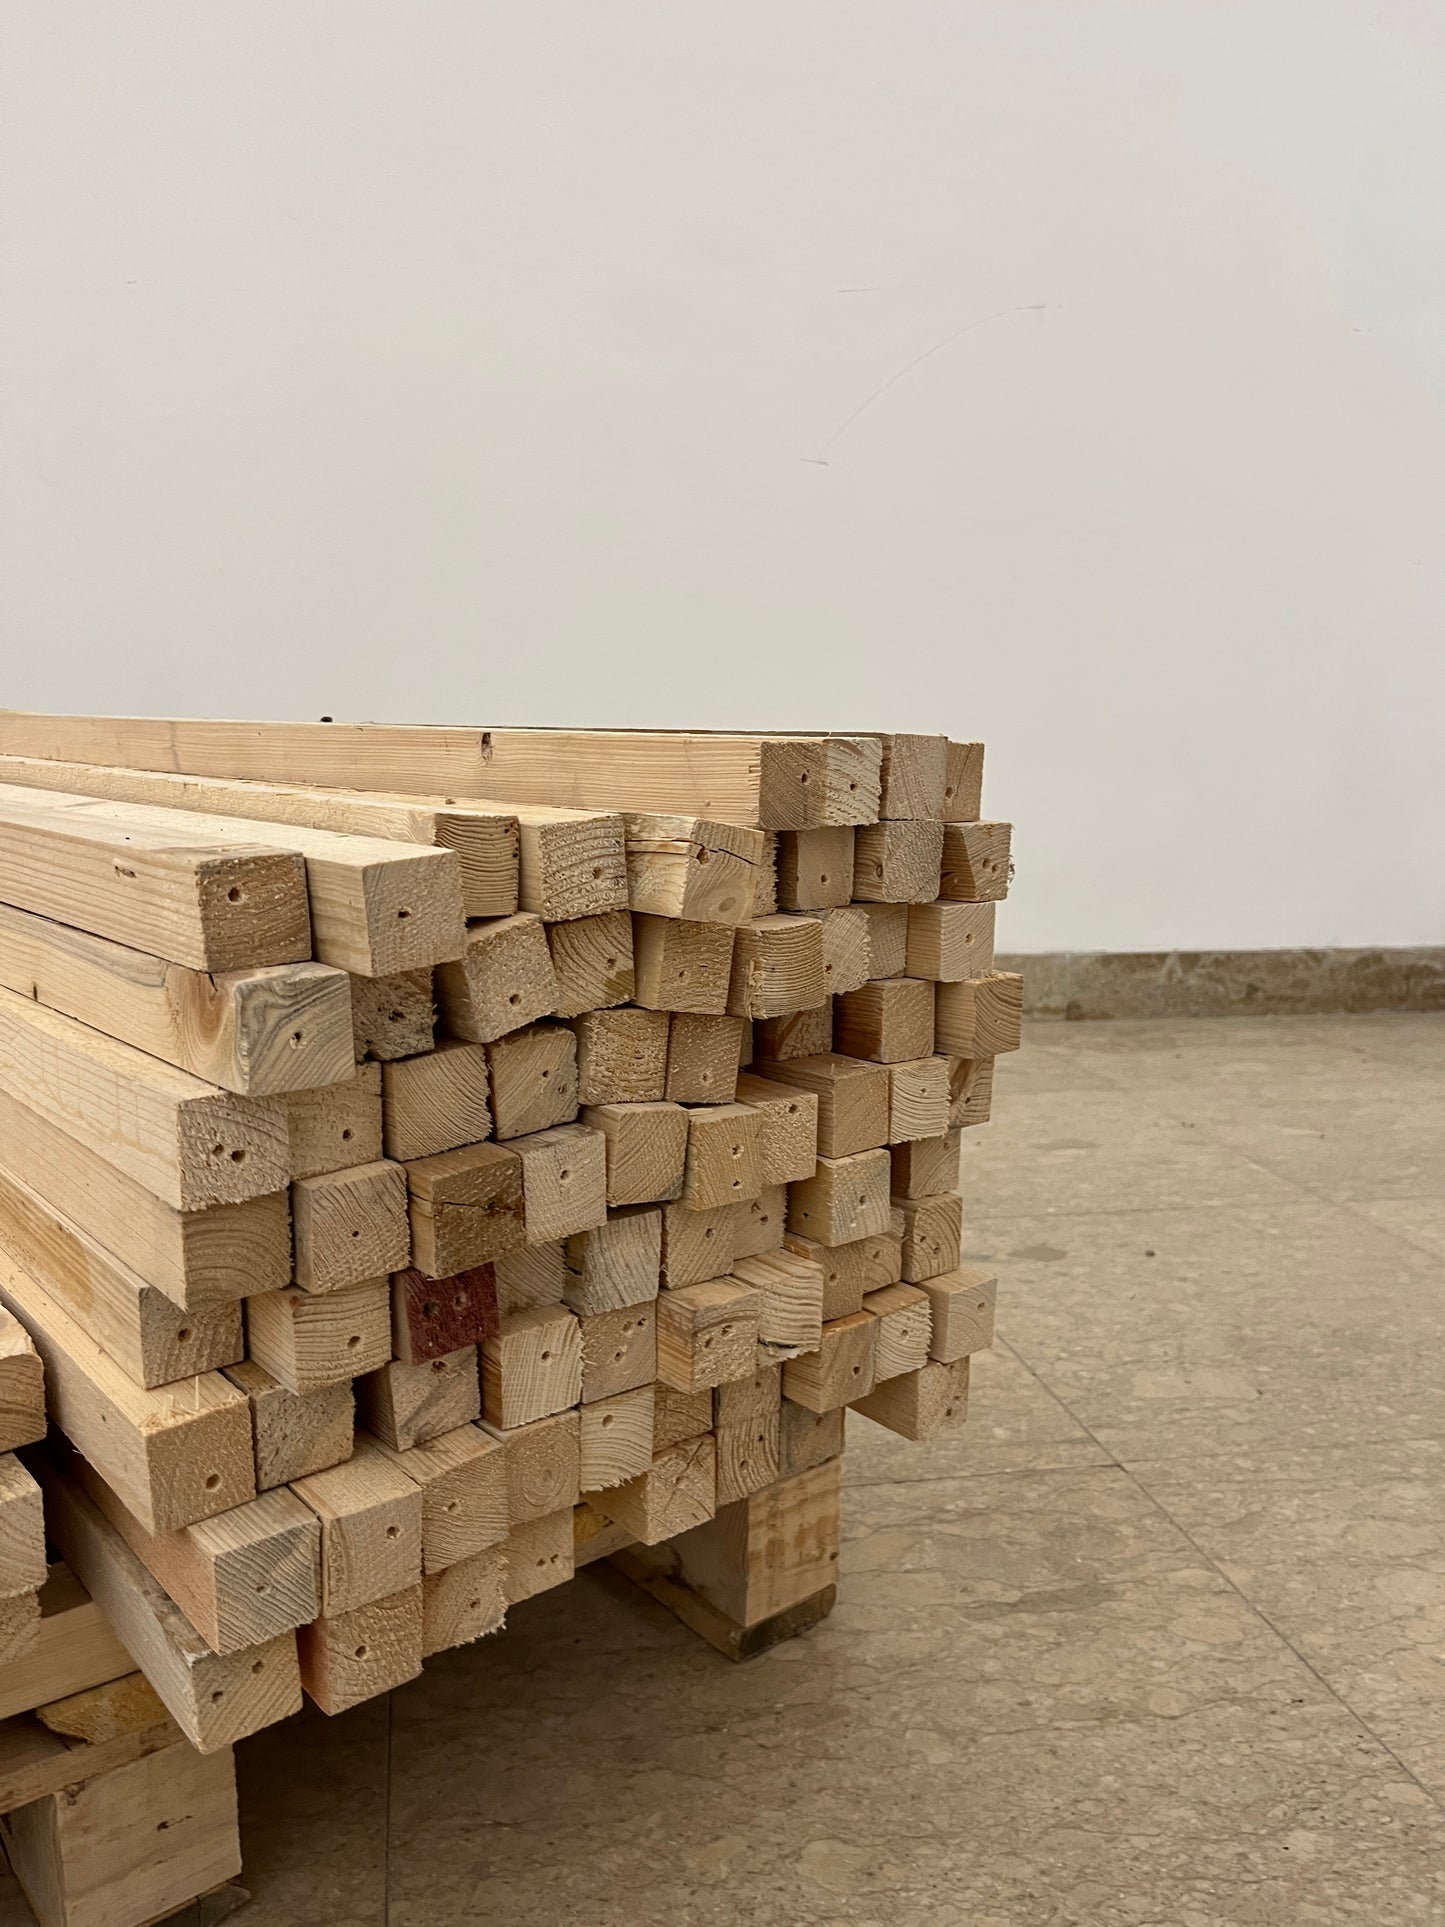 USED UP | Philippine Pavilion | Structural Timber, 1.18.1